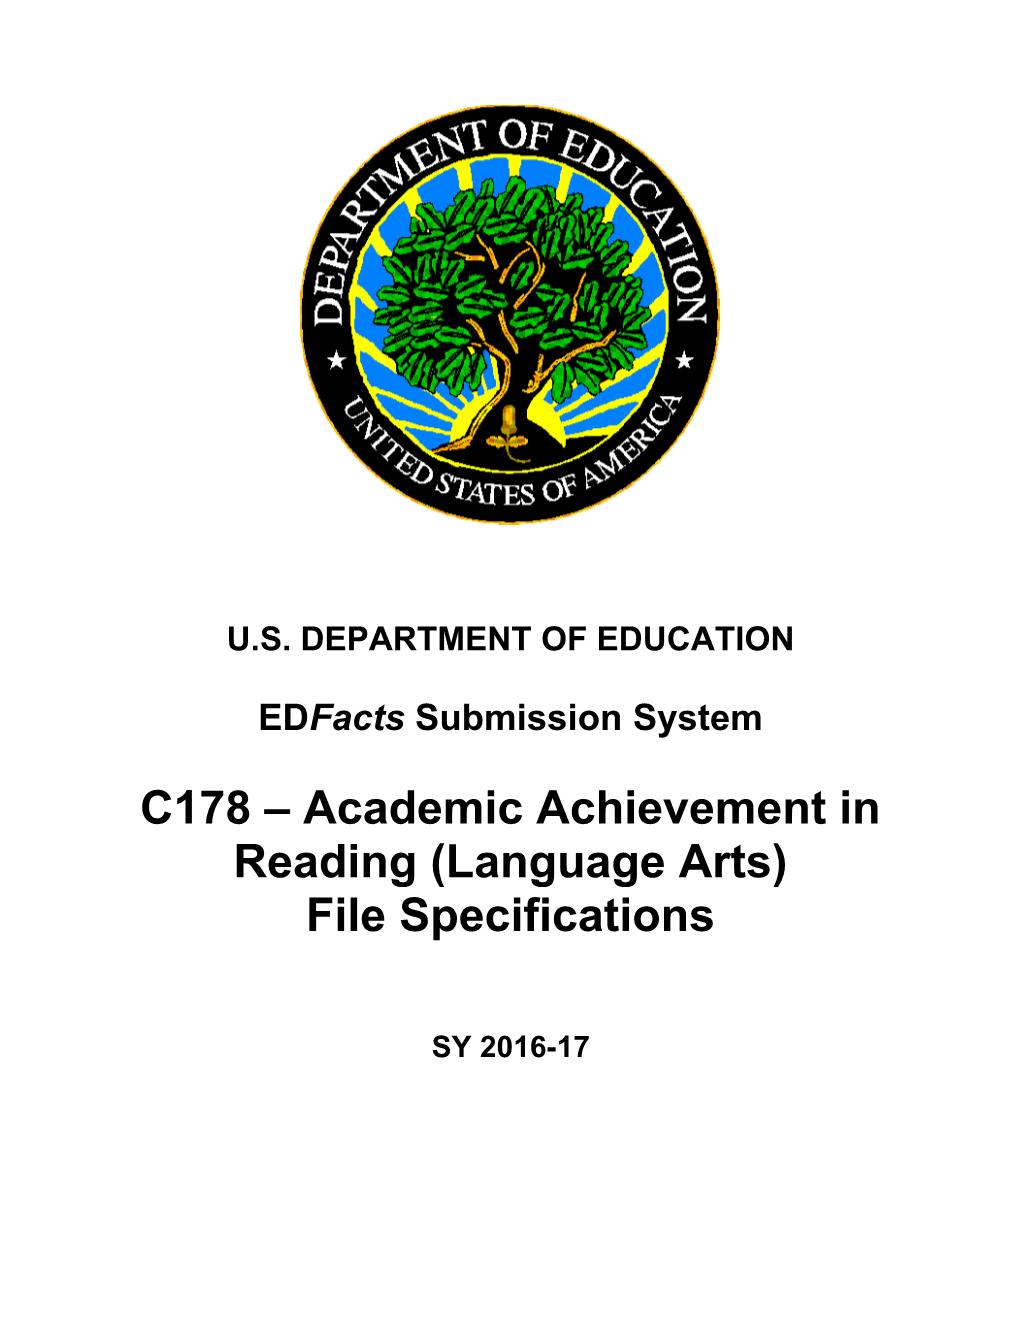 Academic Achievement in Reading (Language Arts) File Specifications (Msword)